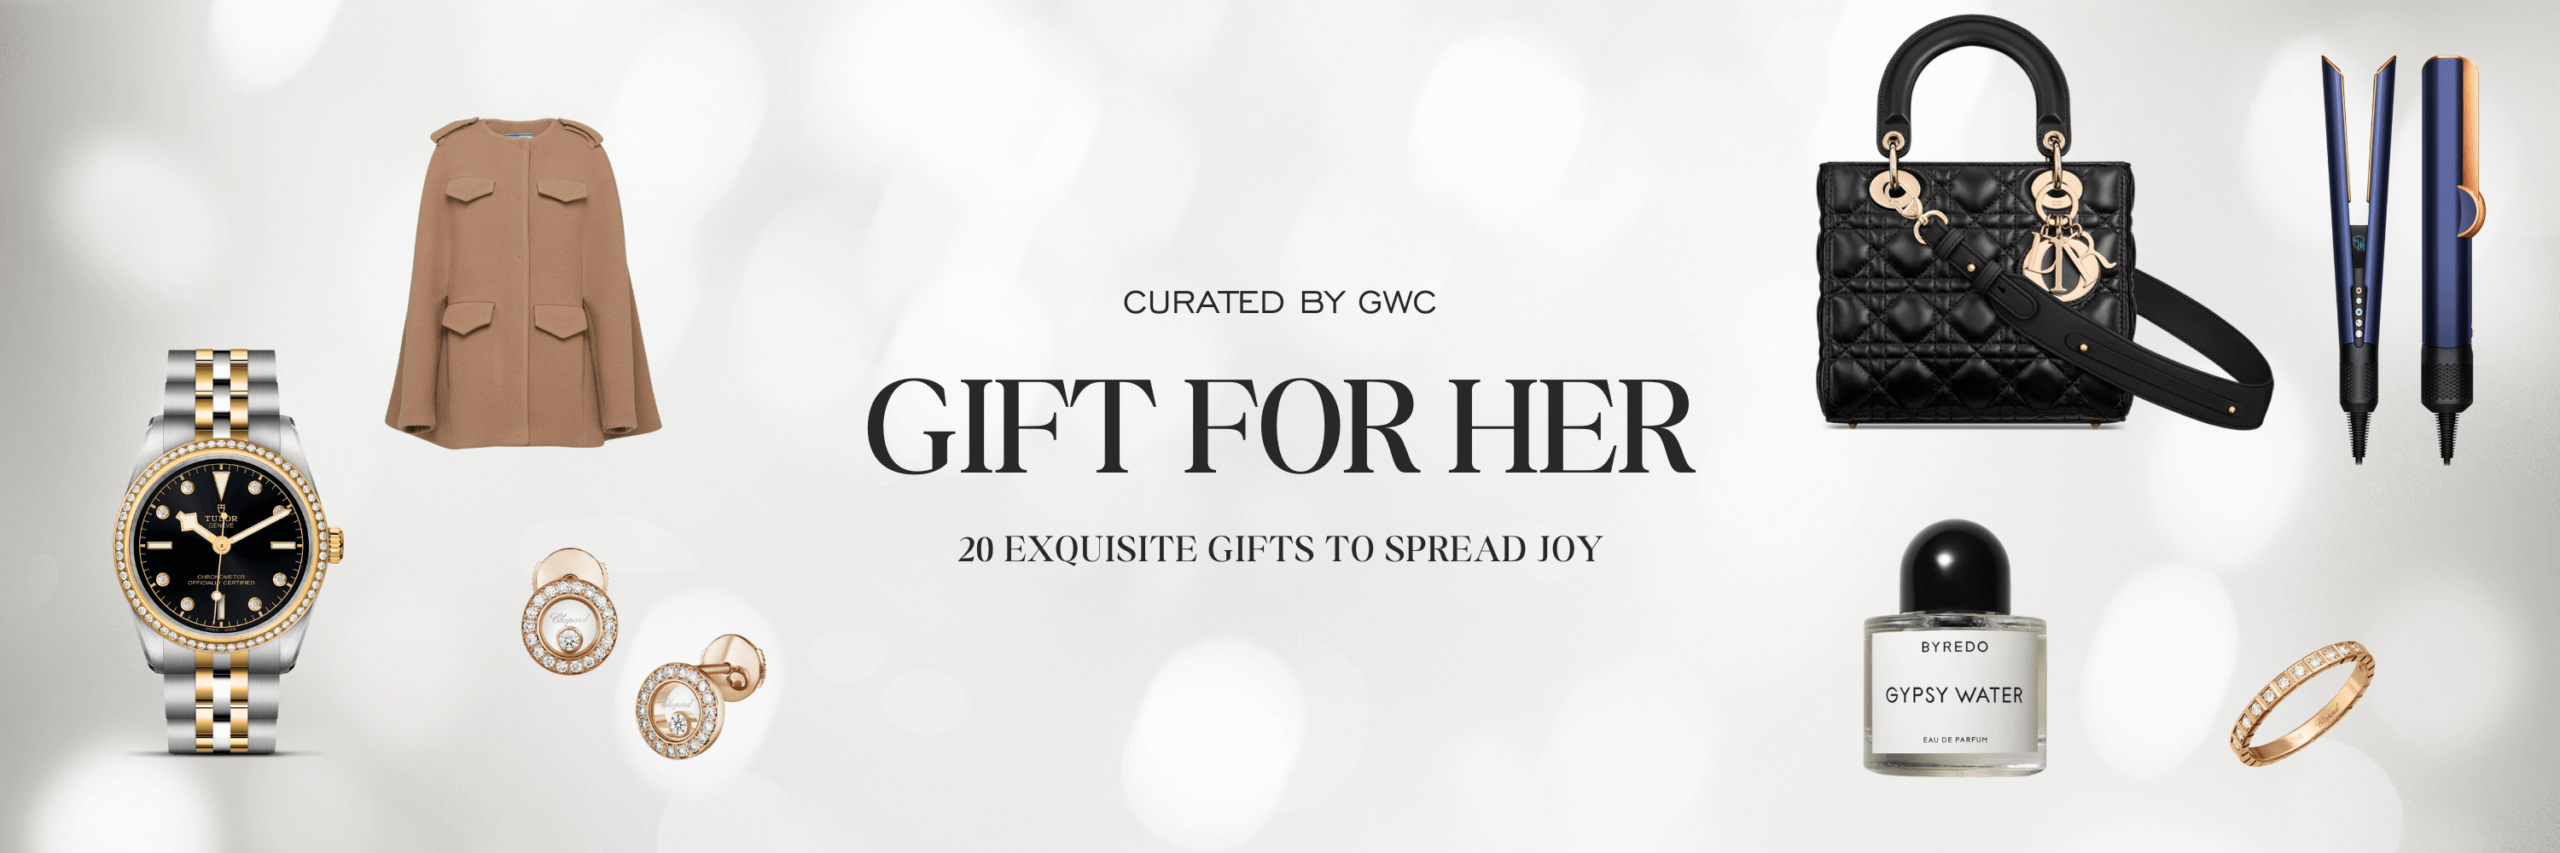 Elegant "Gift for Her" banner featuring a wristwatch, tan jacket, black handbag, pens, and perfumes.